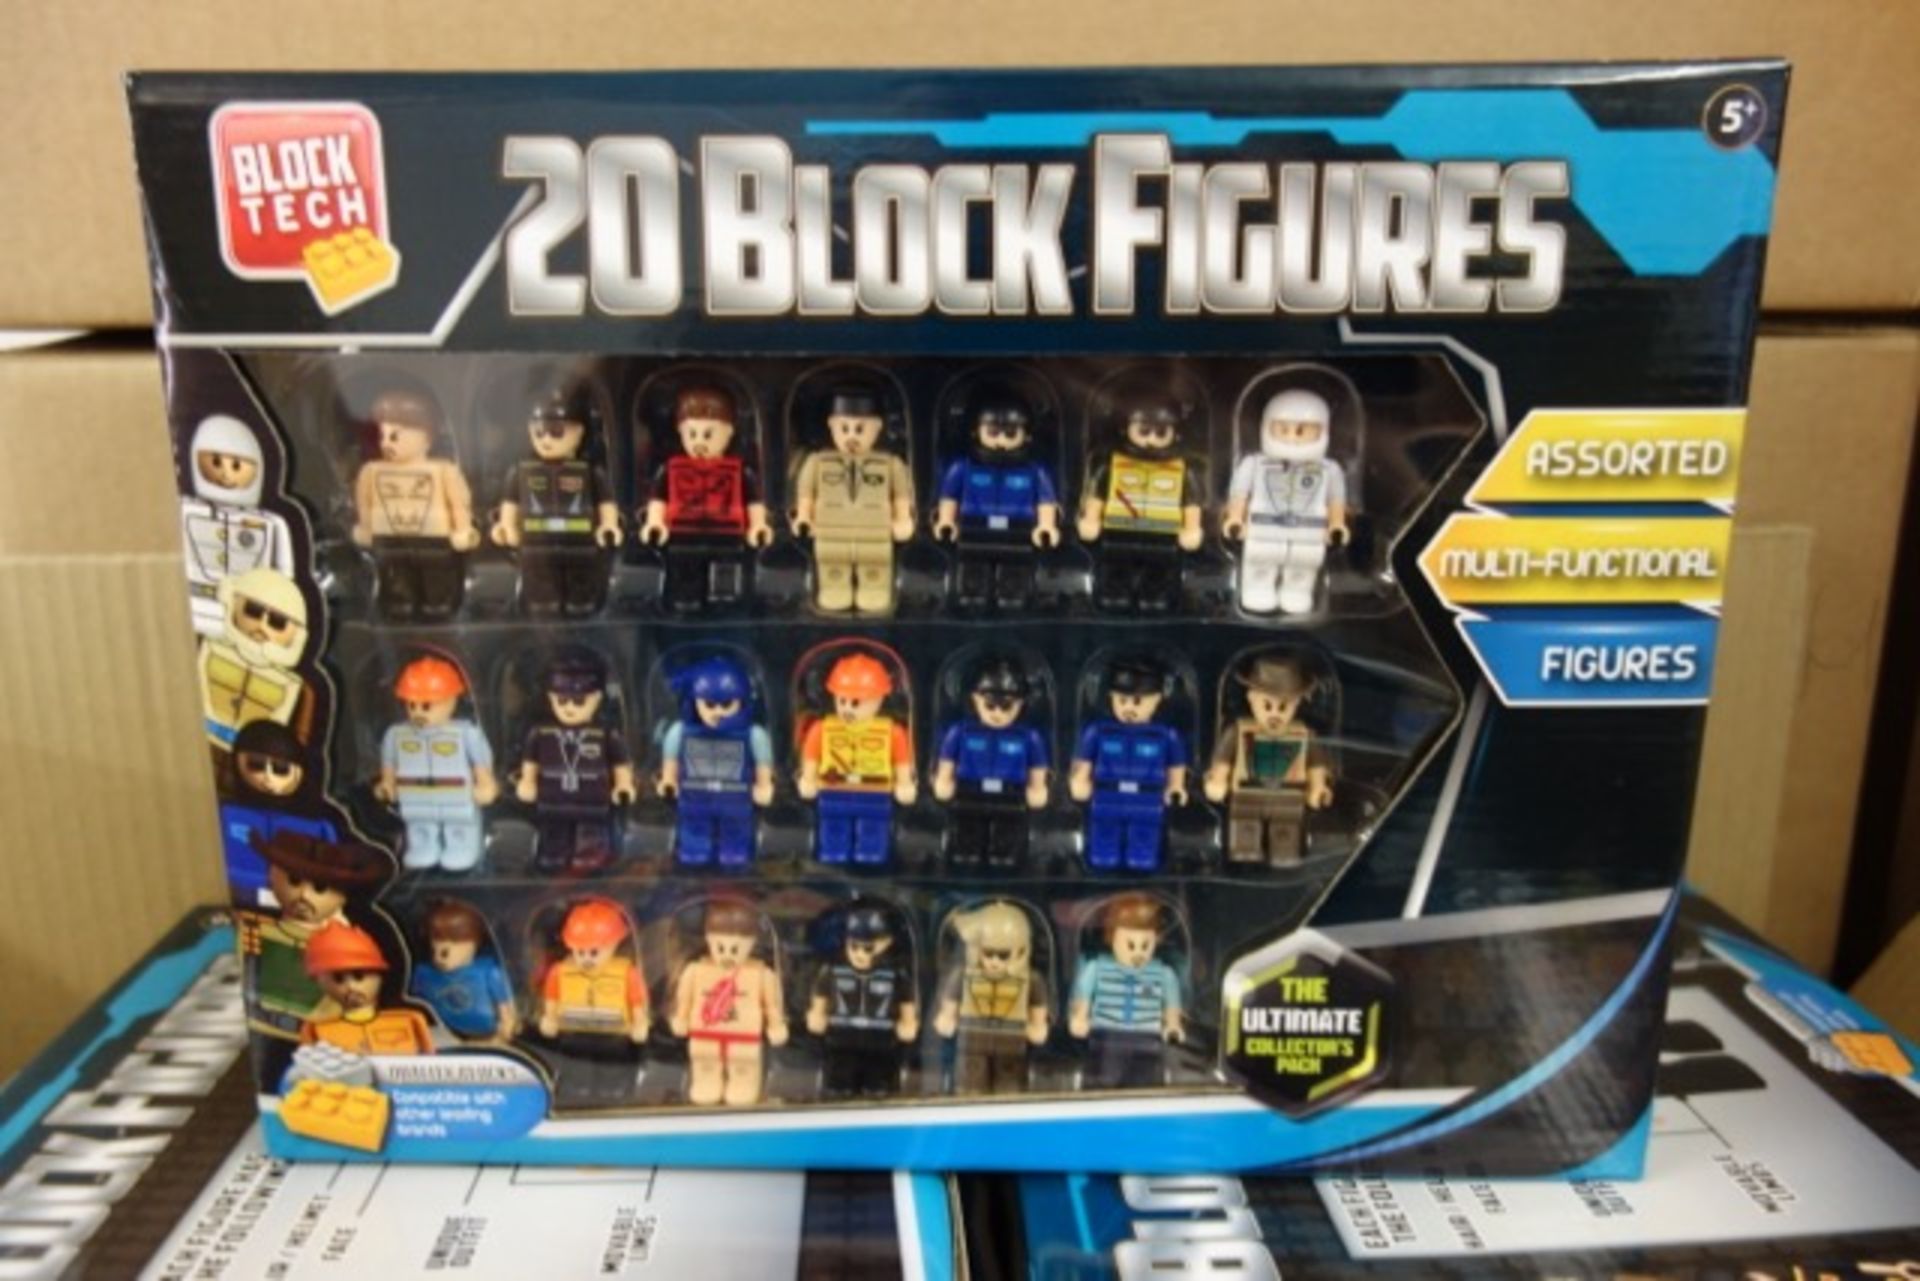 28 x Brand New - Block Tech 20 Block Figure's Set's - The Ultimate Collectors Pack.